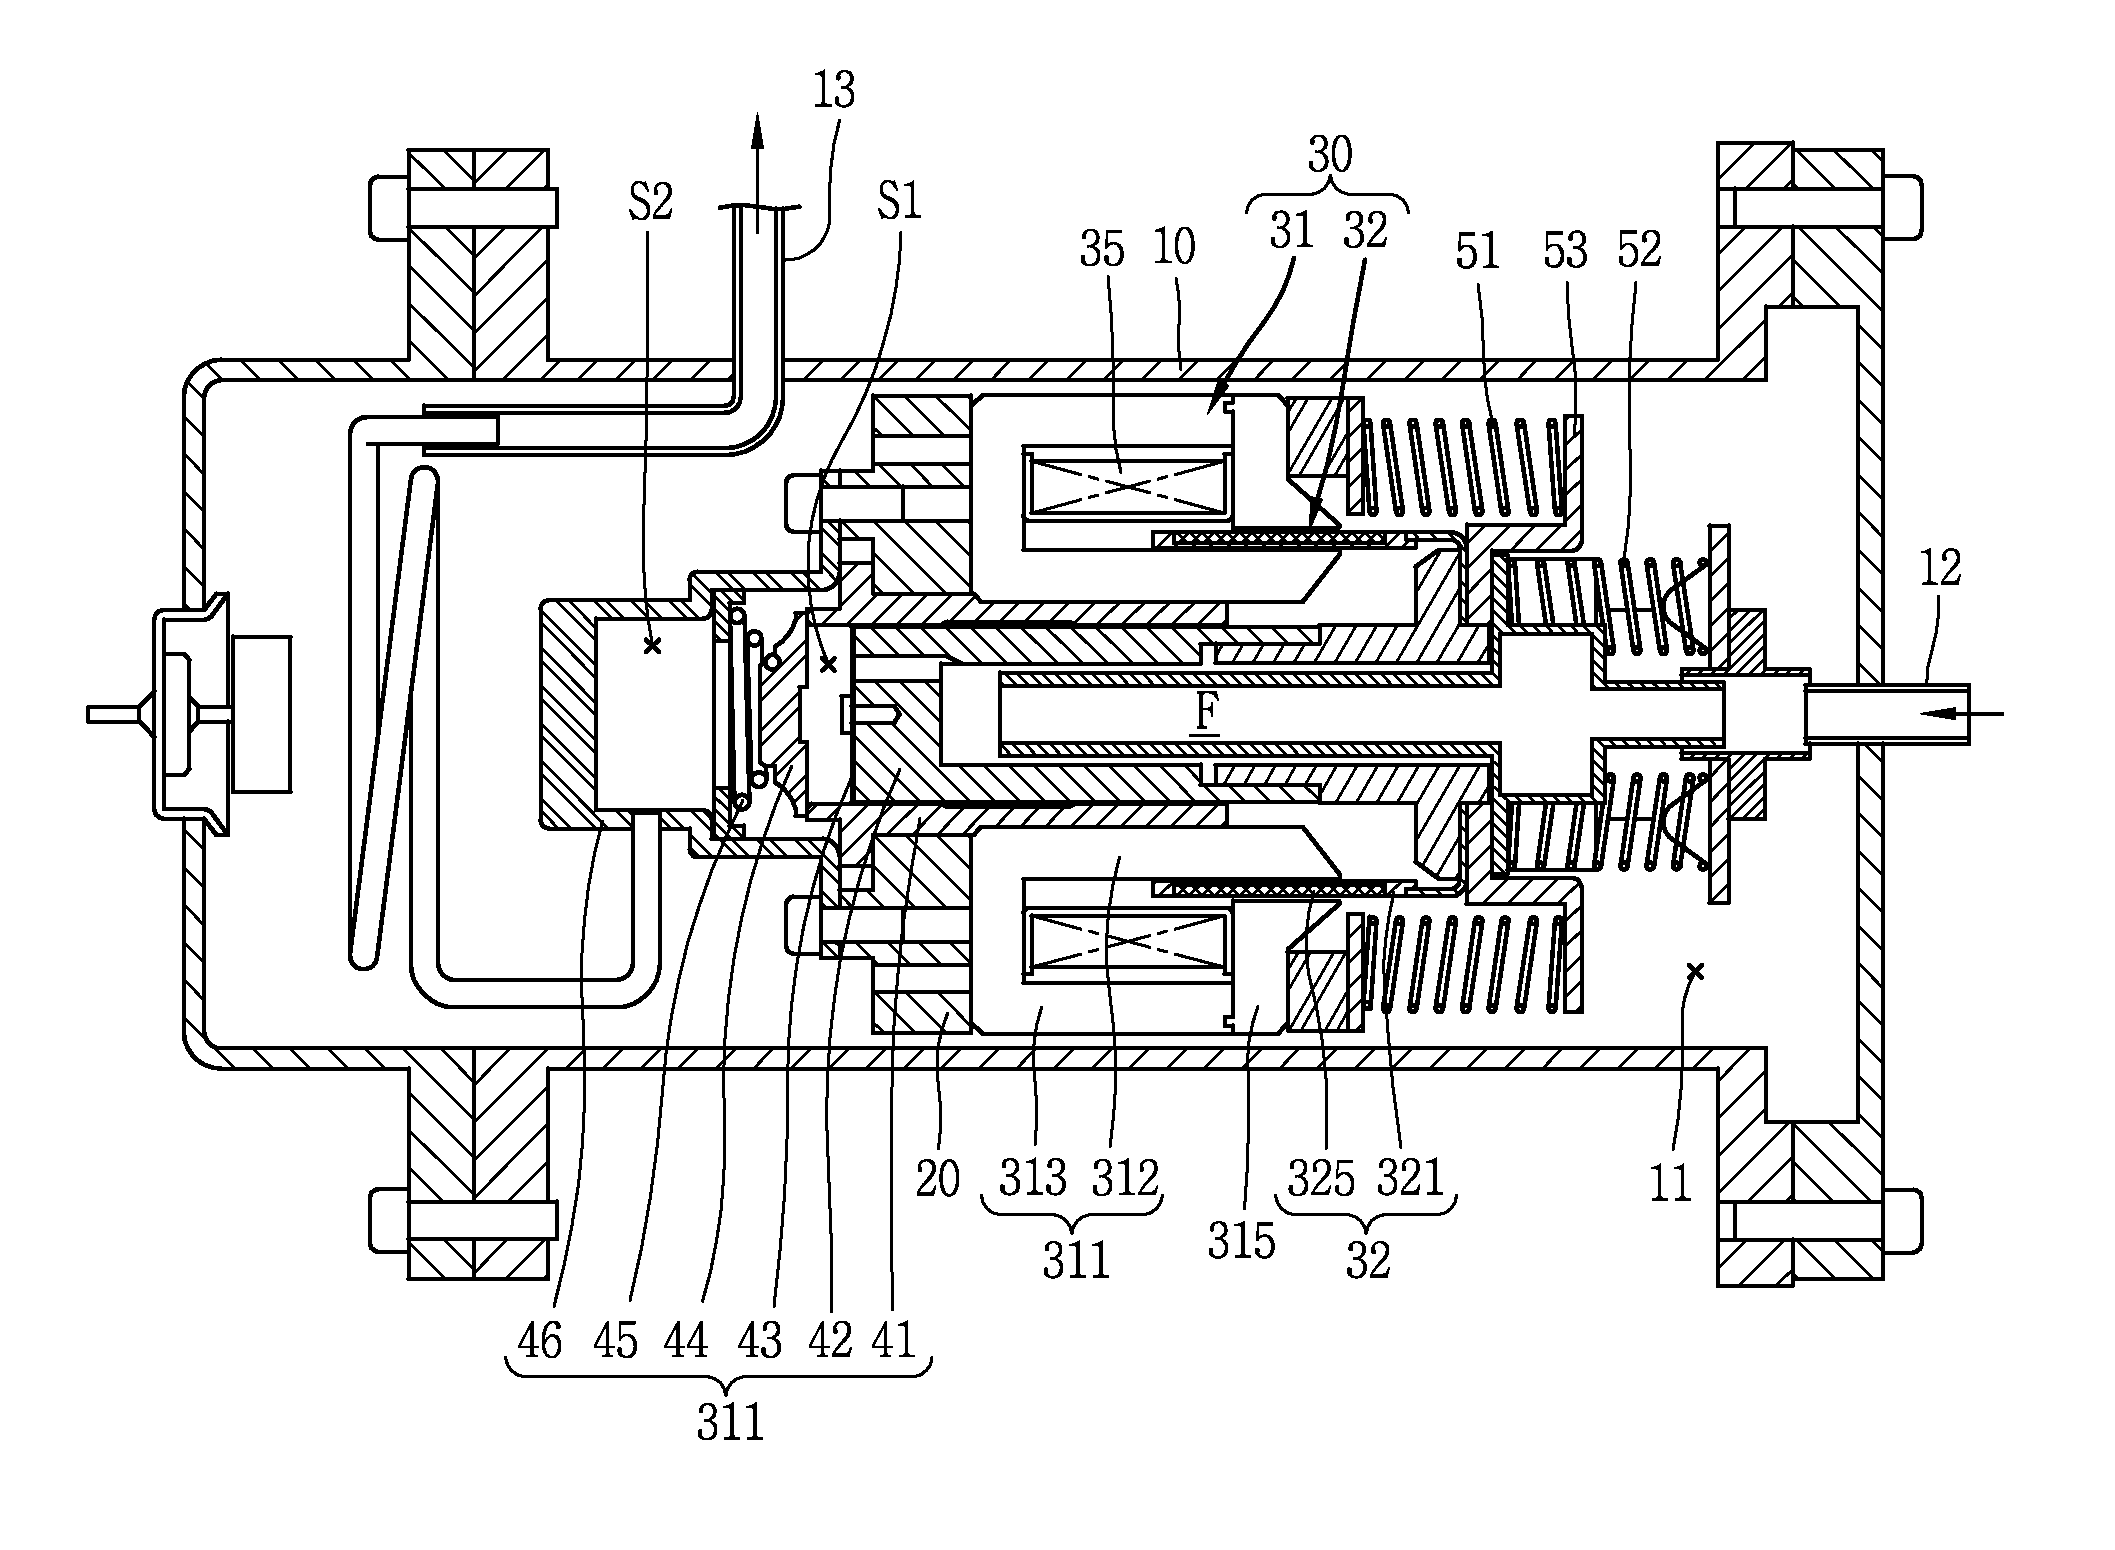 Reciprocating compressor with gas bearing